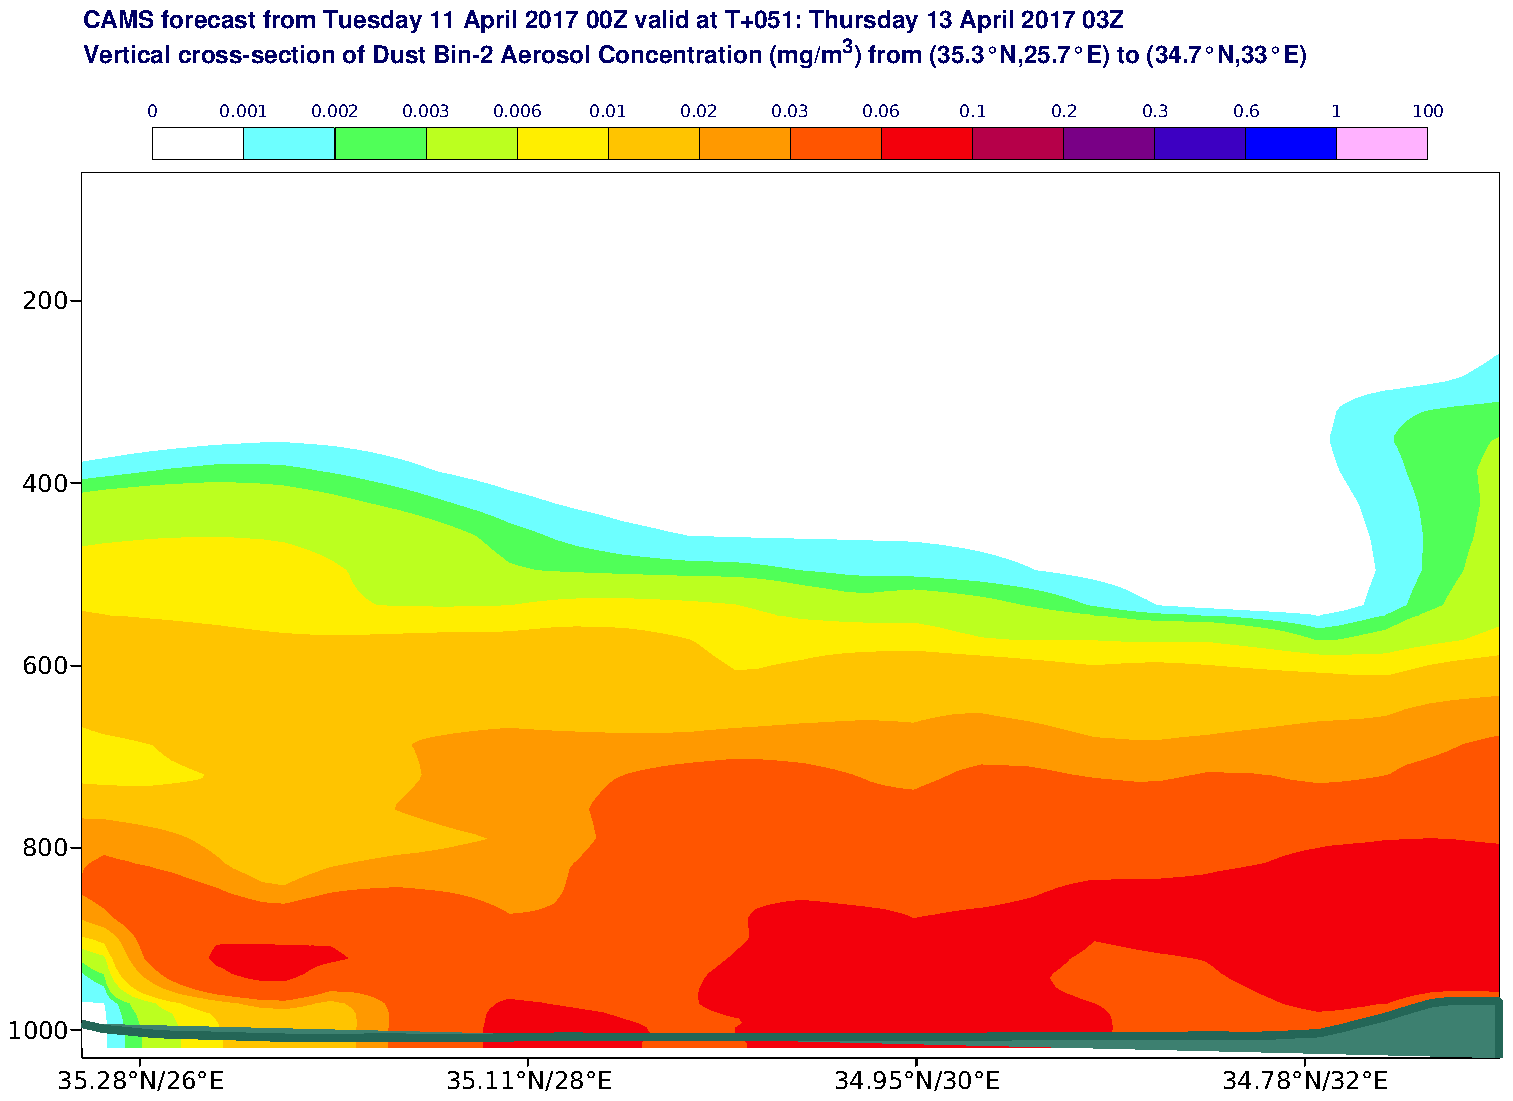 Vertical cross-section of Dust Bin-2 Aerosol Concentration (mg/m3) valid at T51 - 2017-04-13 03:00